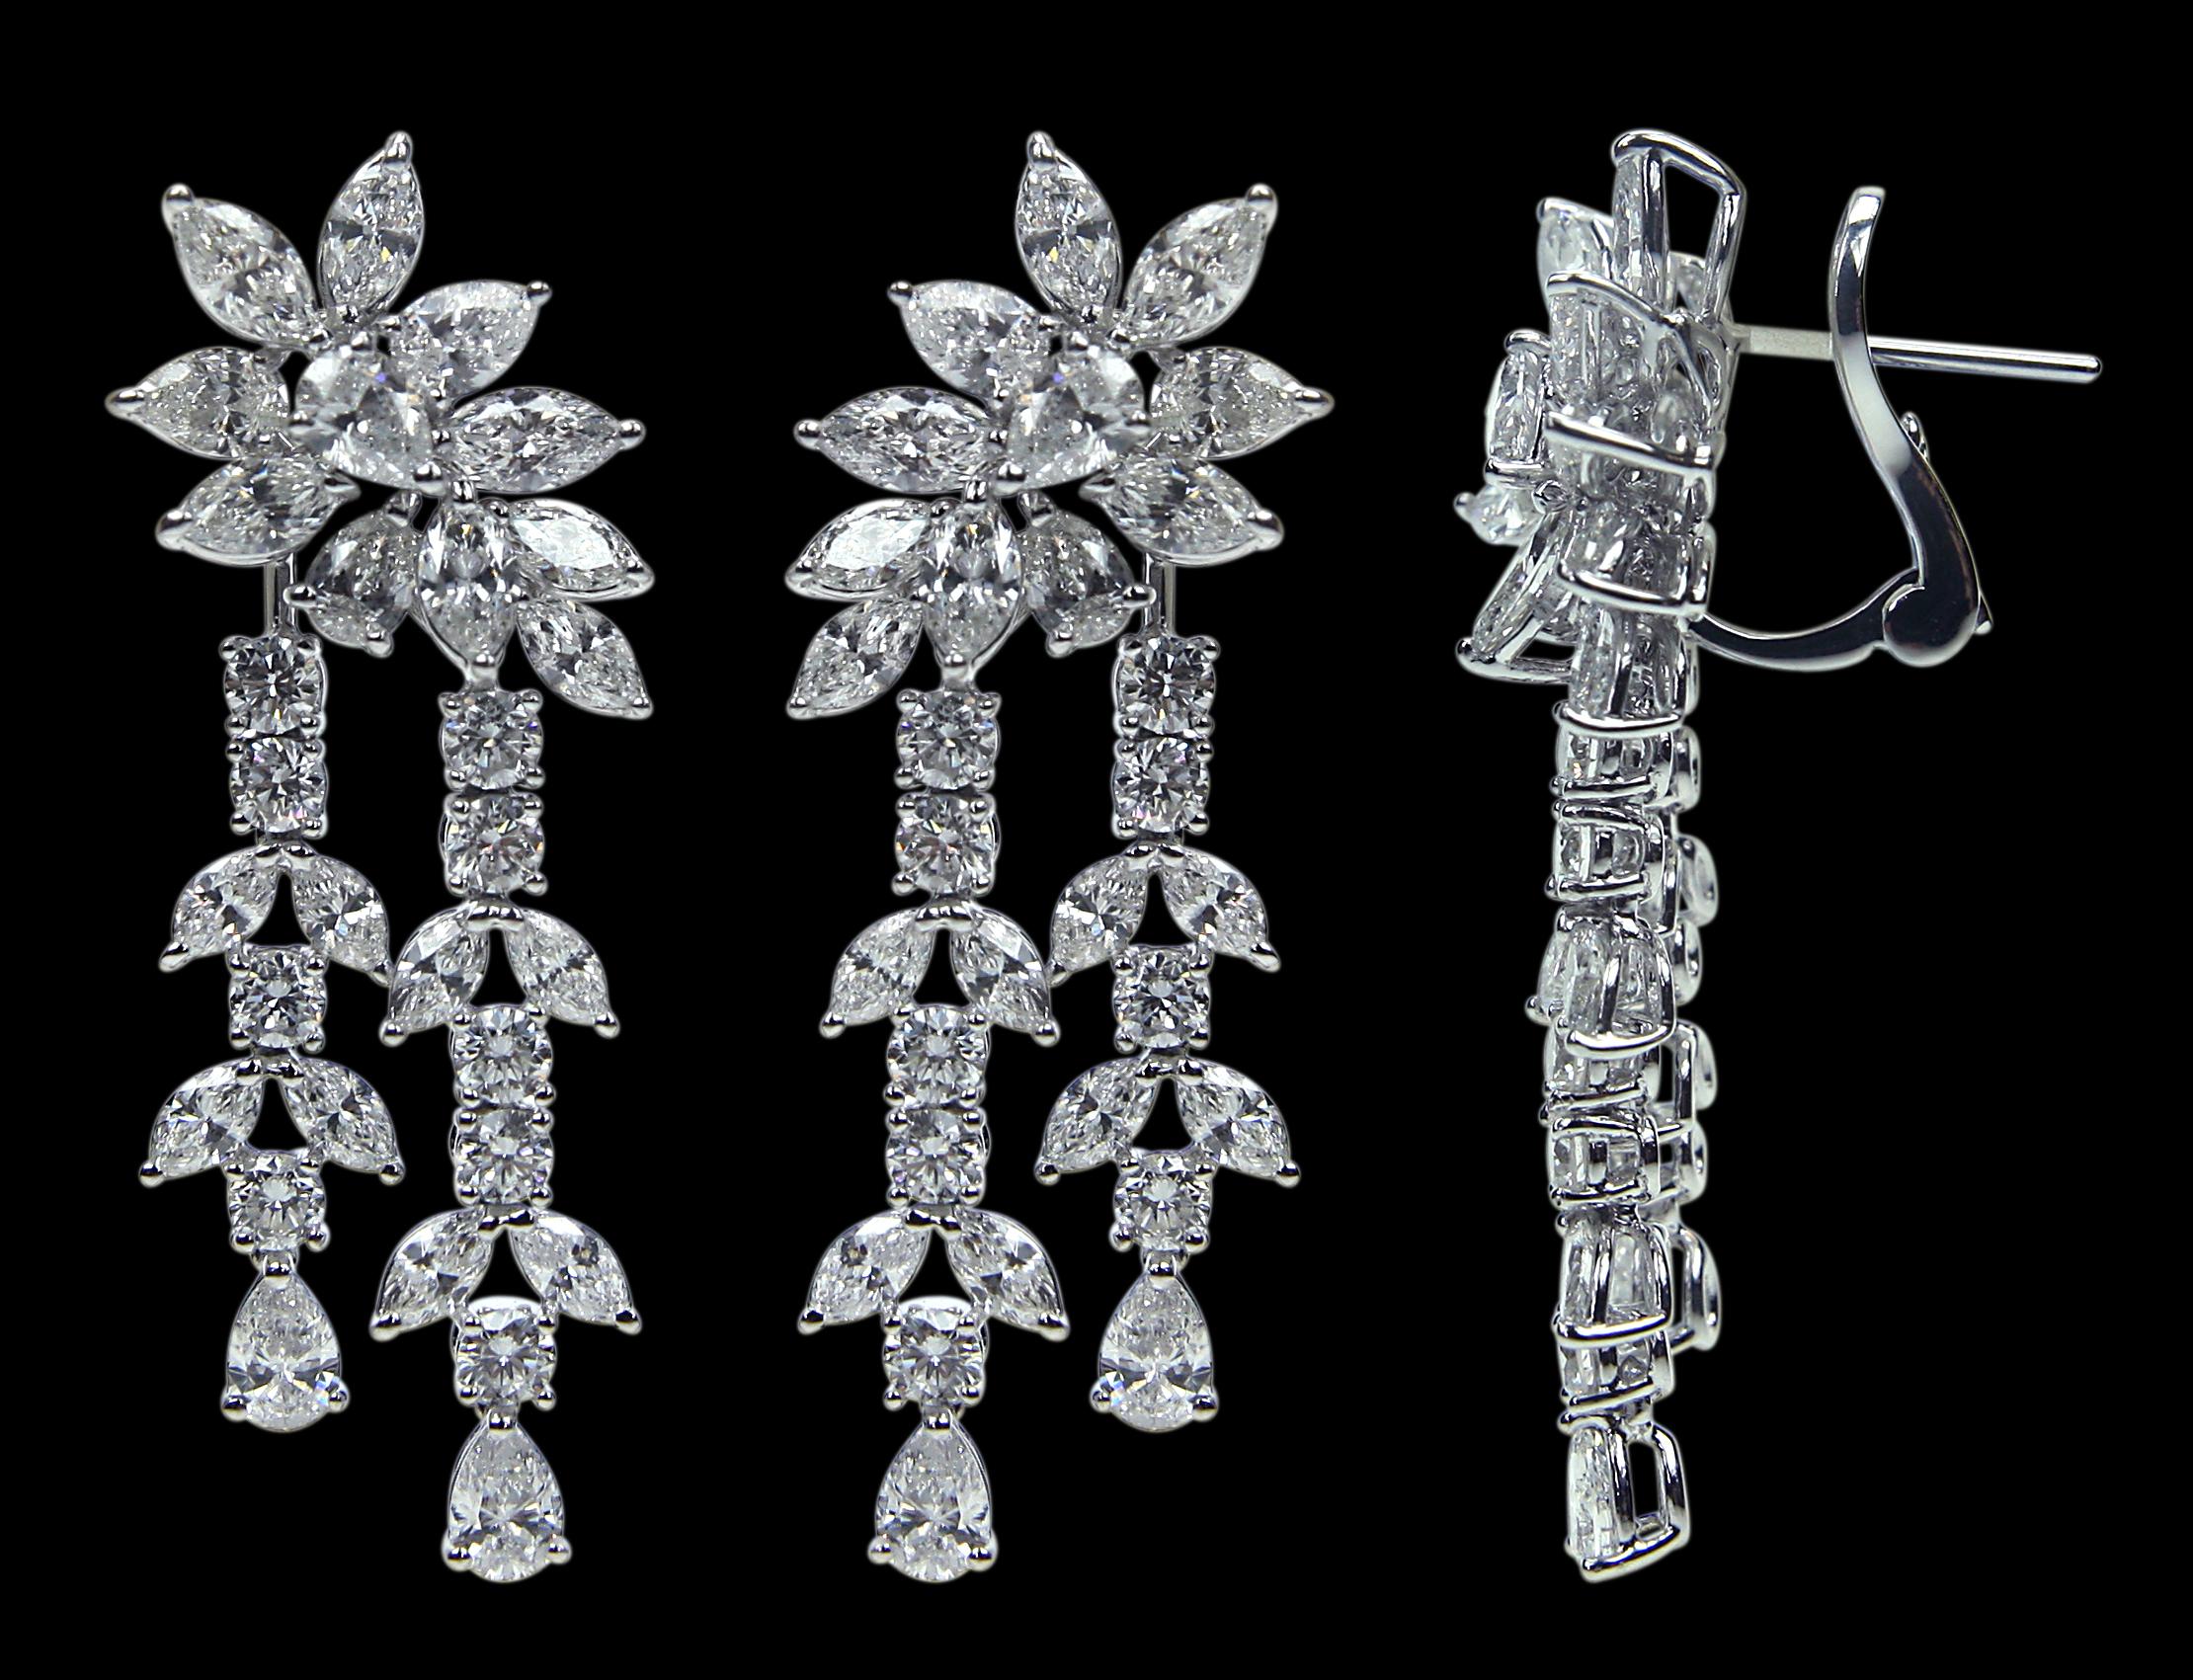 Resplendent 18 Karat White Gold And Diamond Set .

Earrings:
Pear shaped diamonds of approximately 7.170 carats, mounted on 18 karat white gold earring. The earring weighs approximately around 11.146 grams.


Please note: The charges specified do